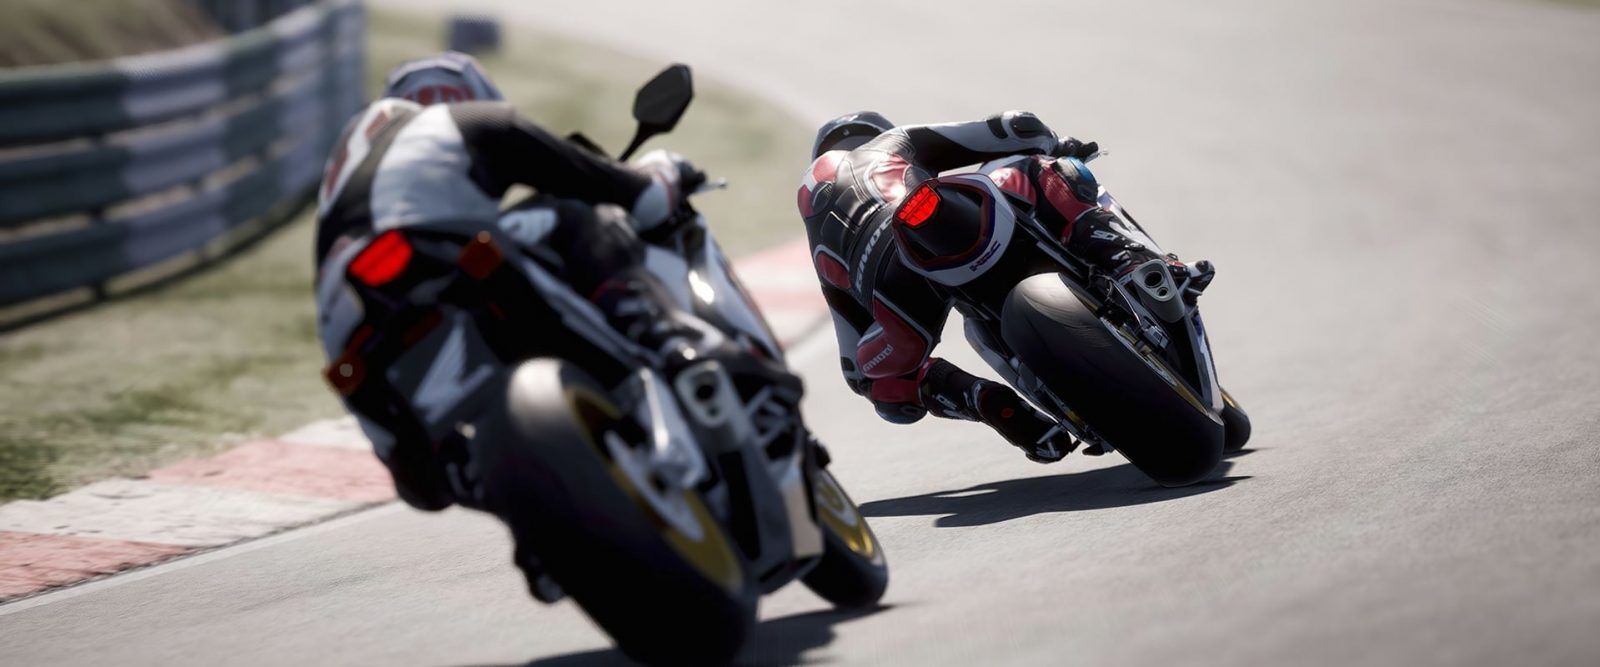 Ride 4 vs. MotoGP 2020: Which one is better